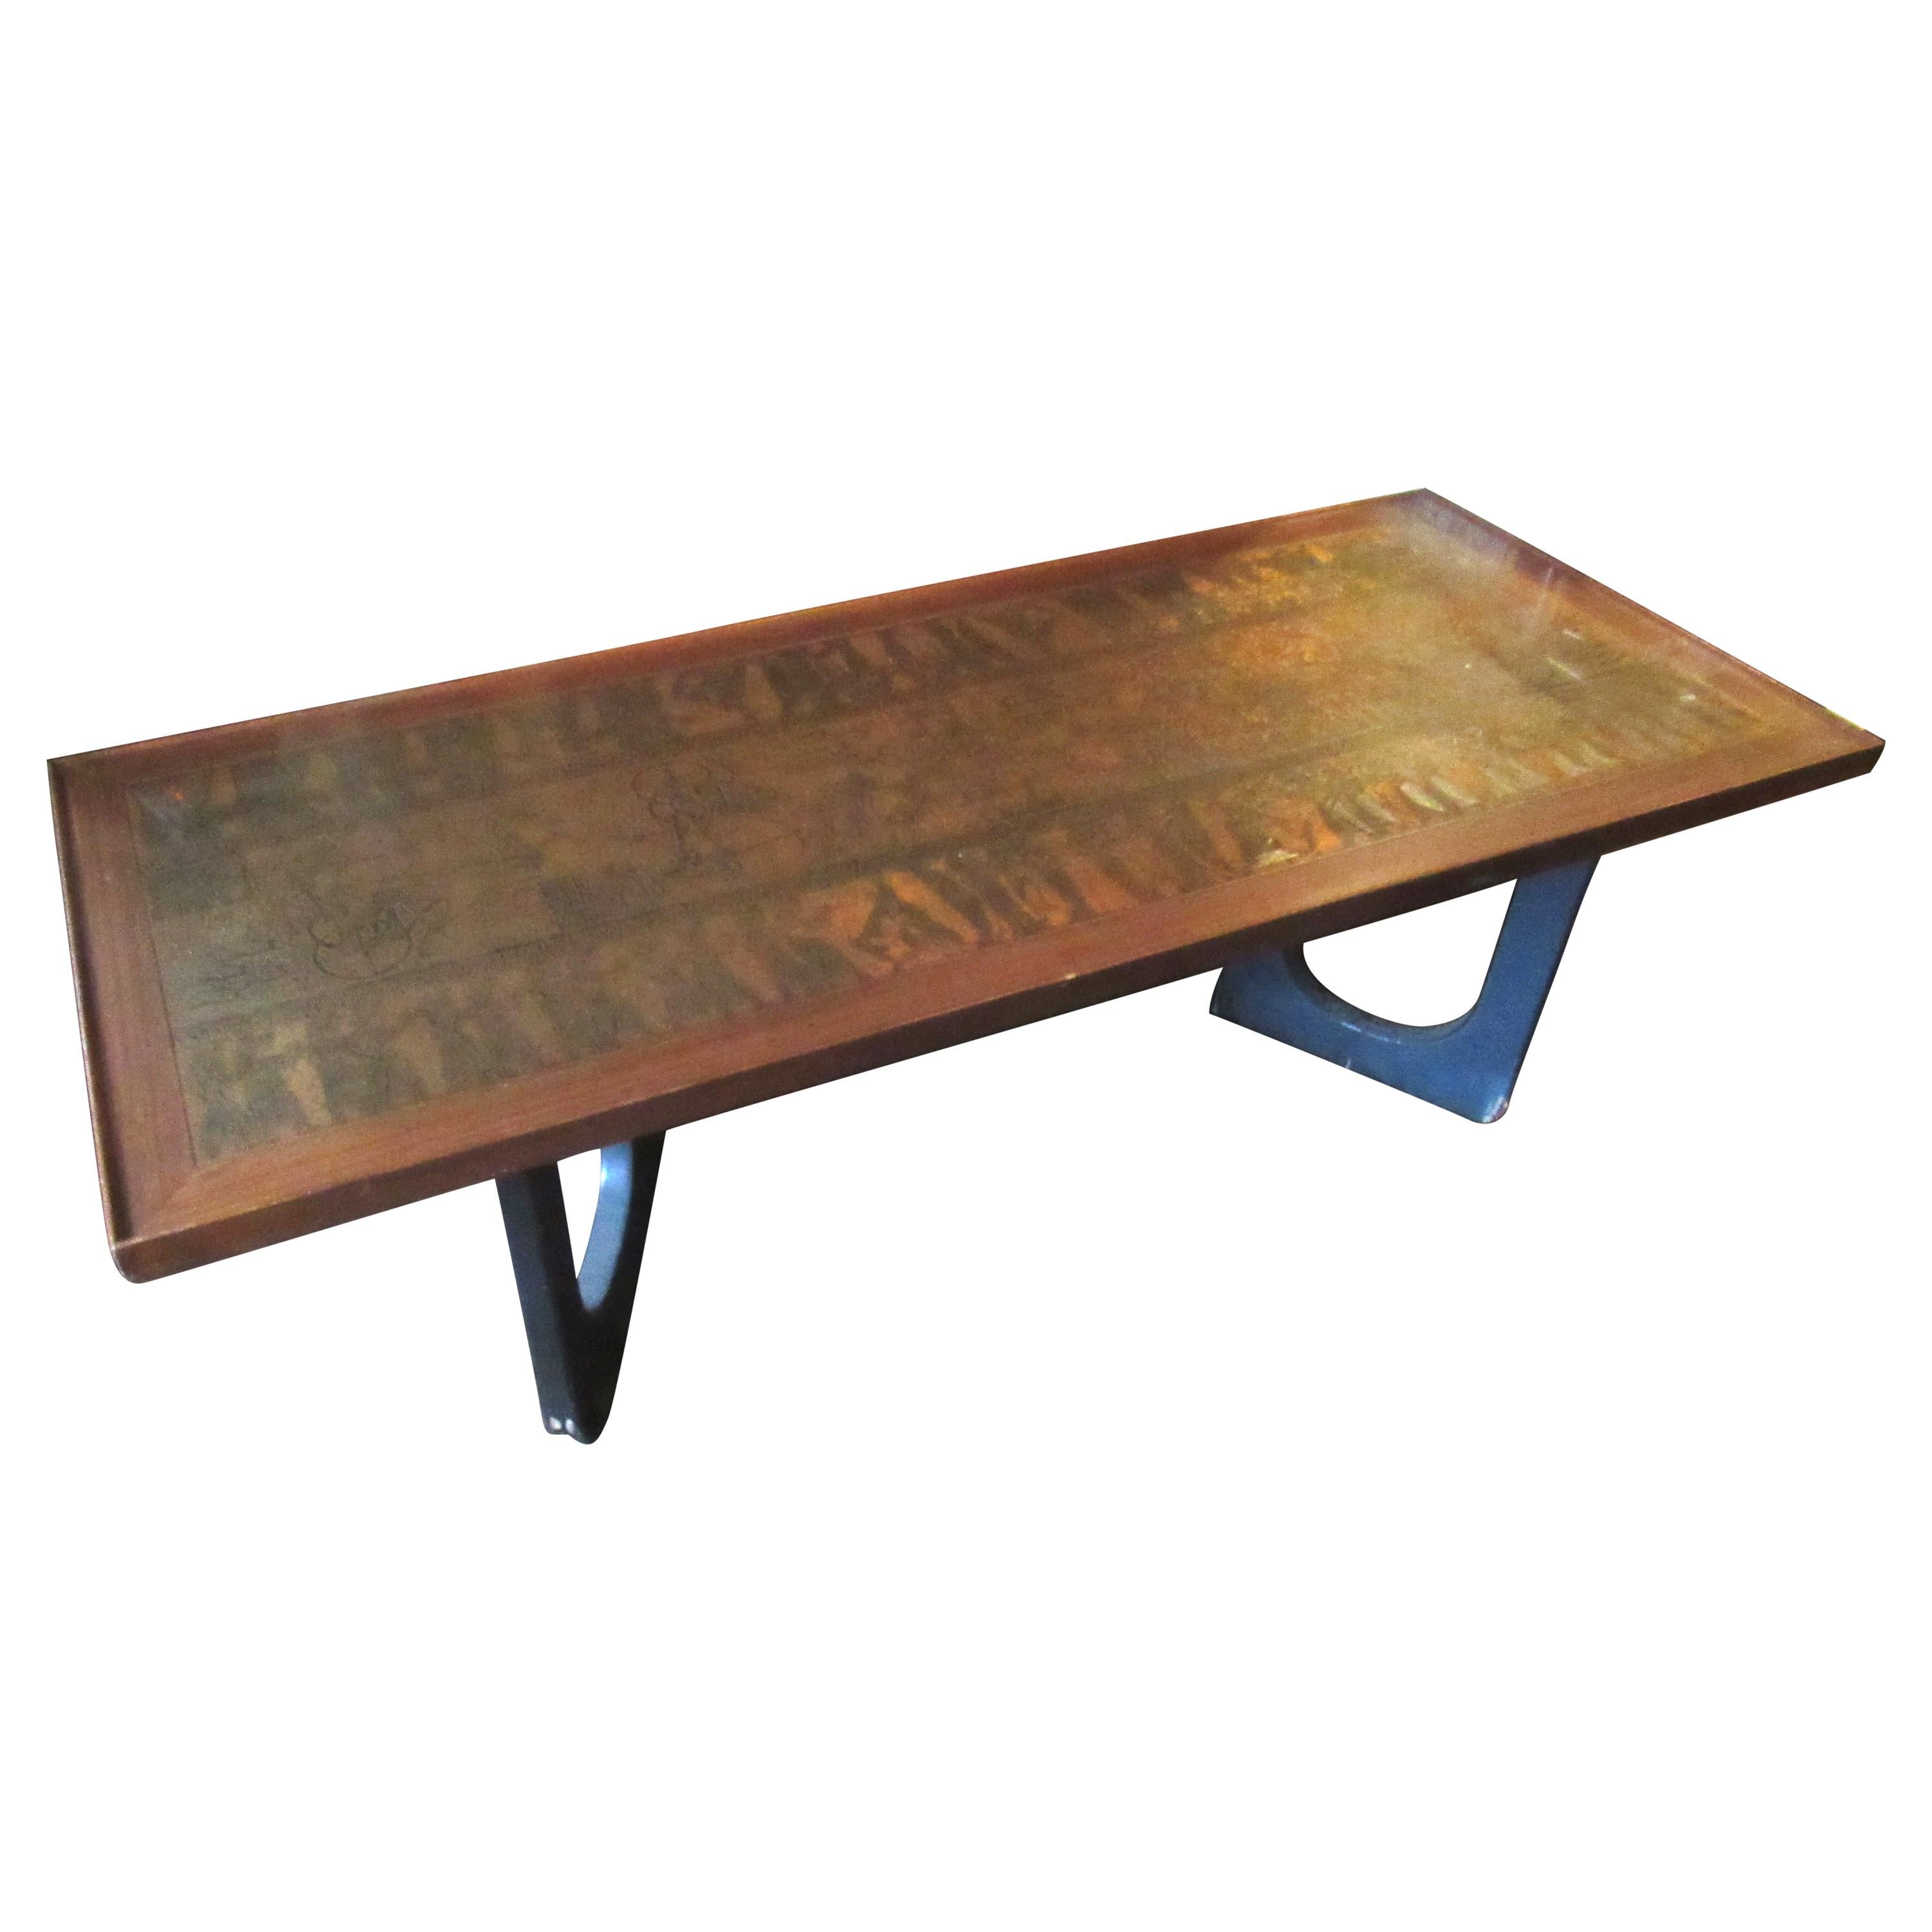 Mid-Century Modern/Egyptian Revival Copper Inlaid Coffee Table